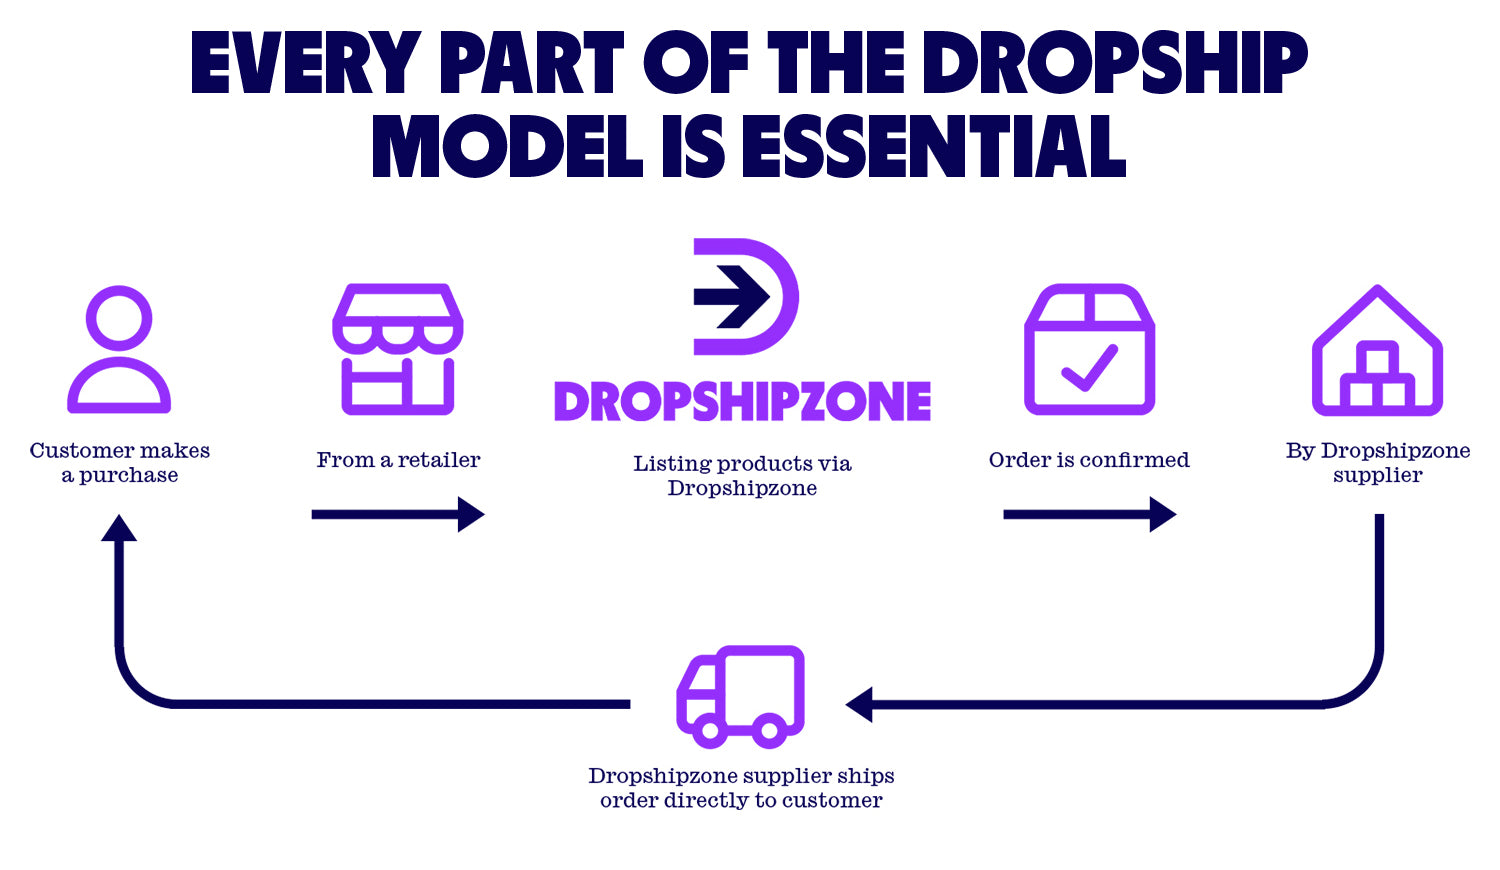 The dropship model can be beneficial for suppliers as they can reach a wider customer base without dealing with the customer directly.